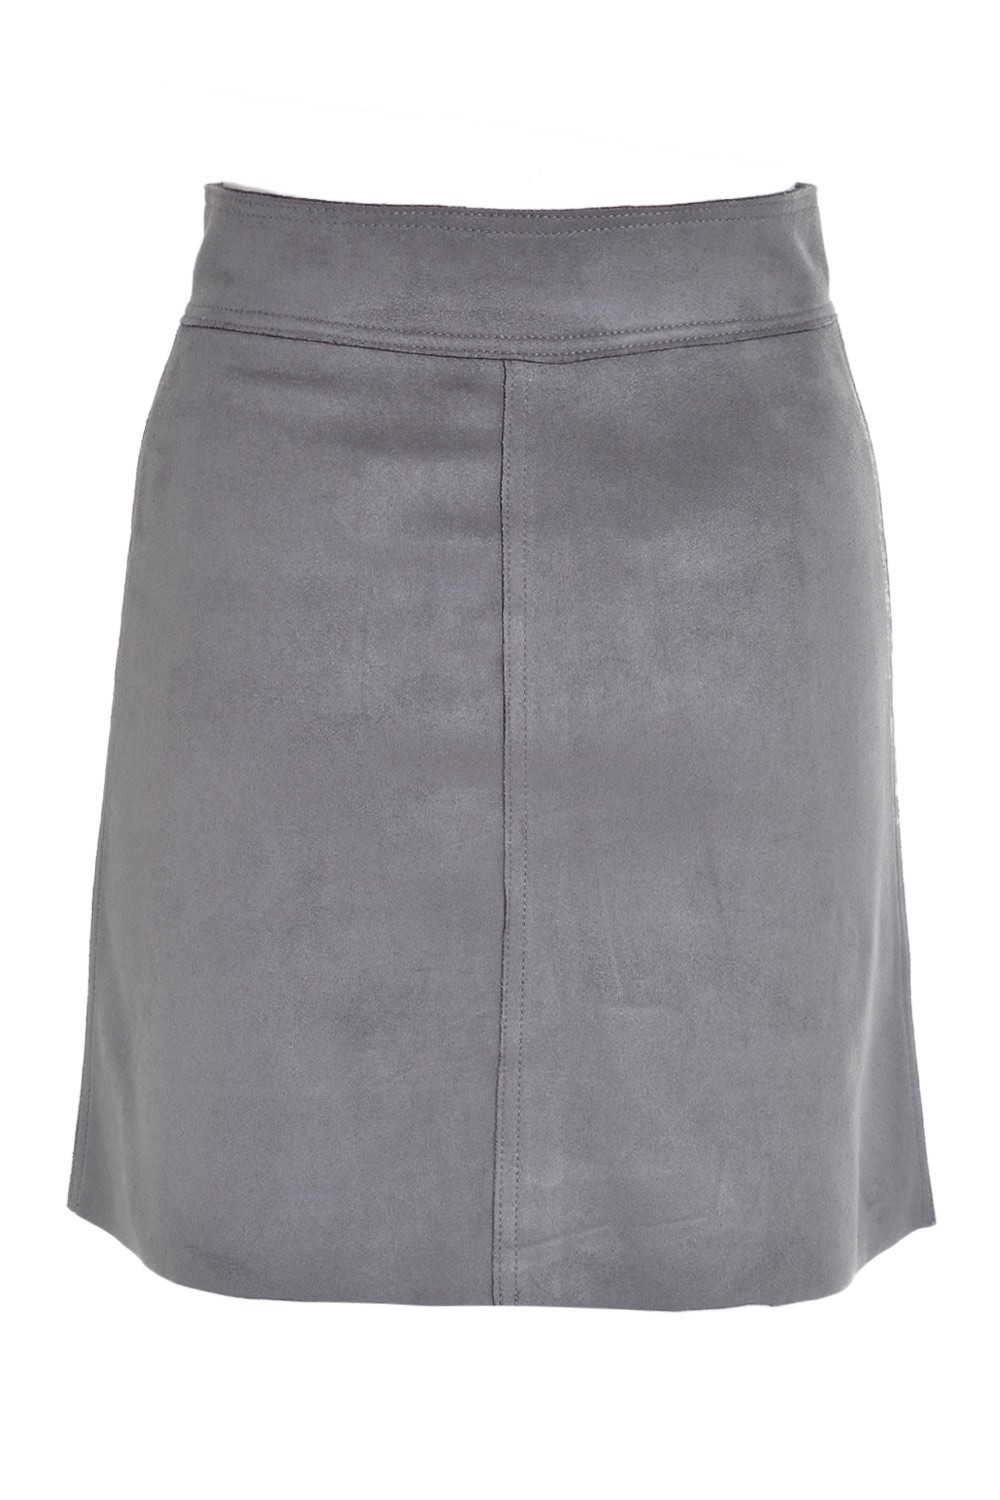 Olivia Bonded Faux Suede Skirt in Grey